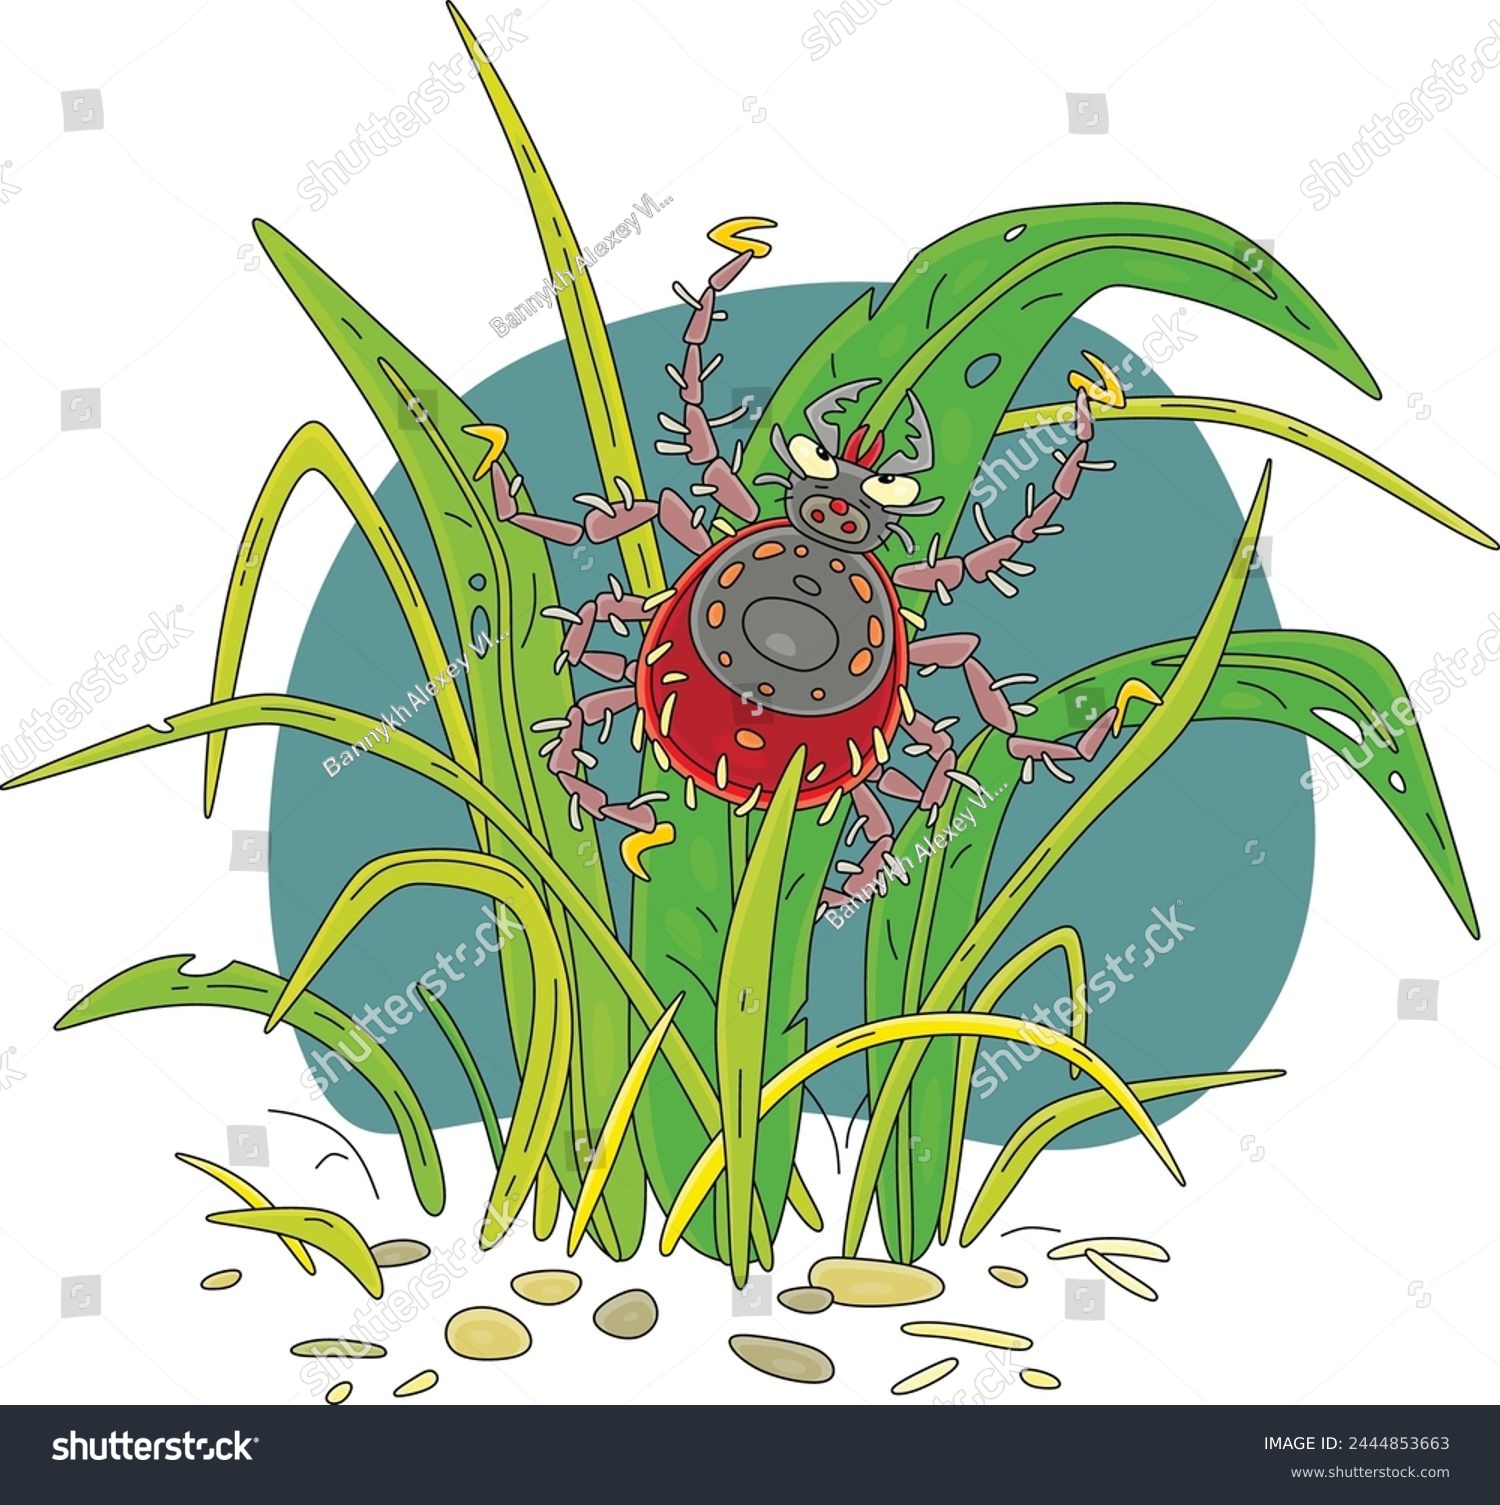 SVG of Ghastly and very dangerous bloodsucking tick hiding and hunting among leaves of grass in a summer forest, vector cartoon illustration on a white background svg